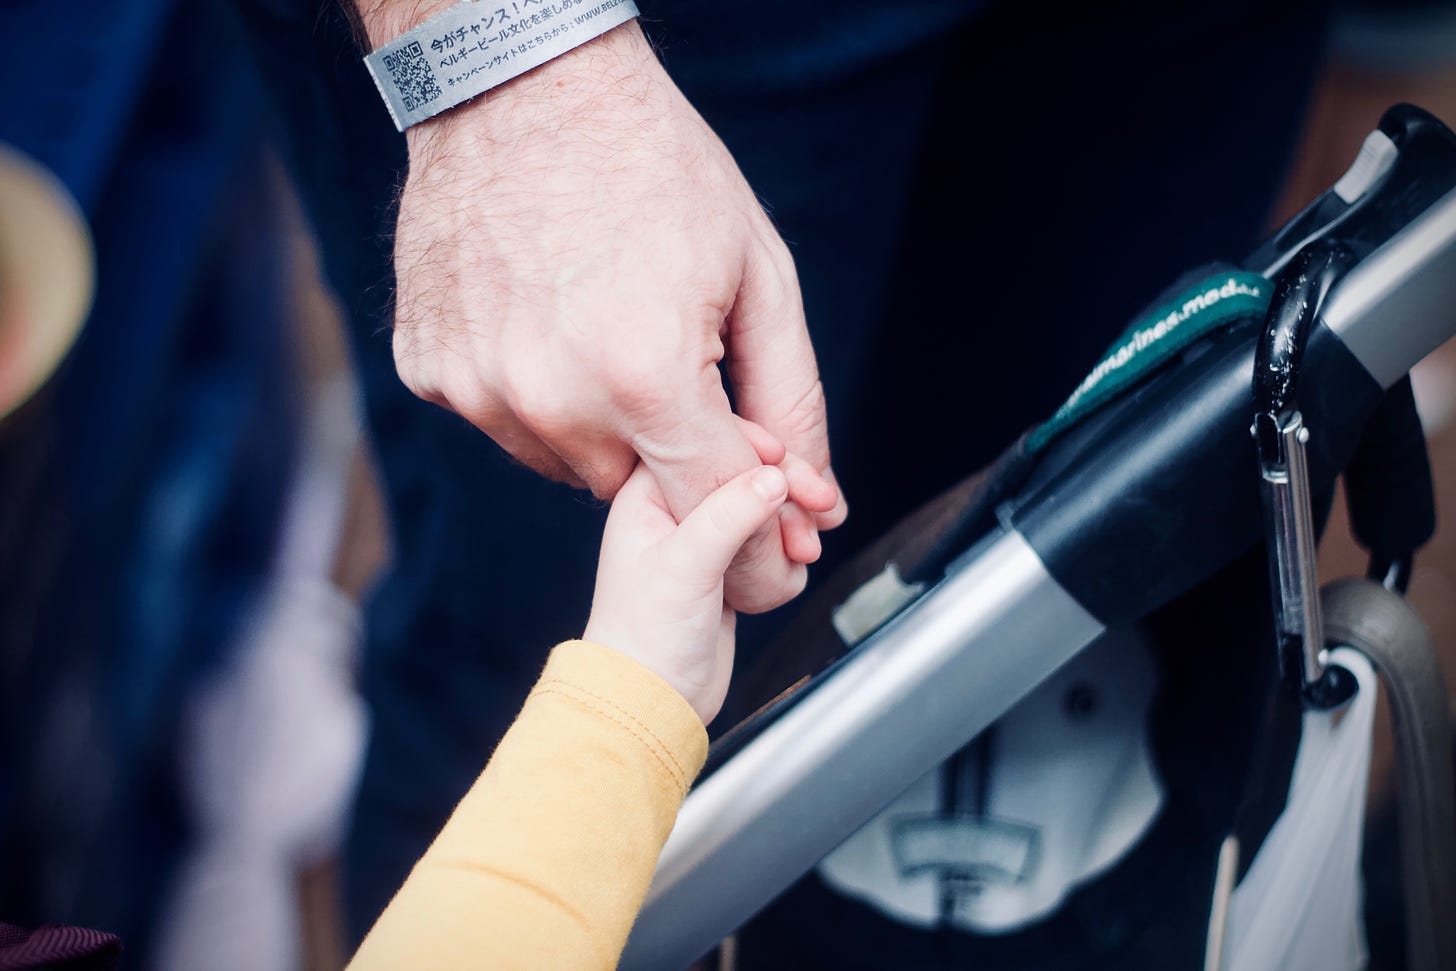 A small child’s hand grips onto the finger of an adult’s hand (Photo by Jelleke Vanooteghem on Unsplash)